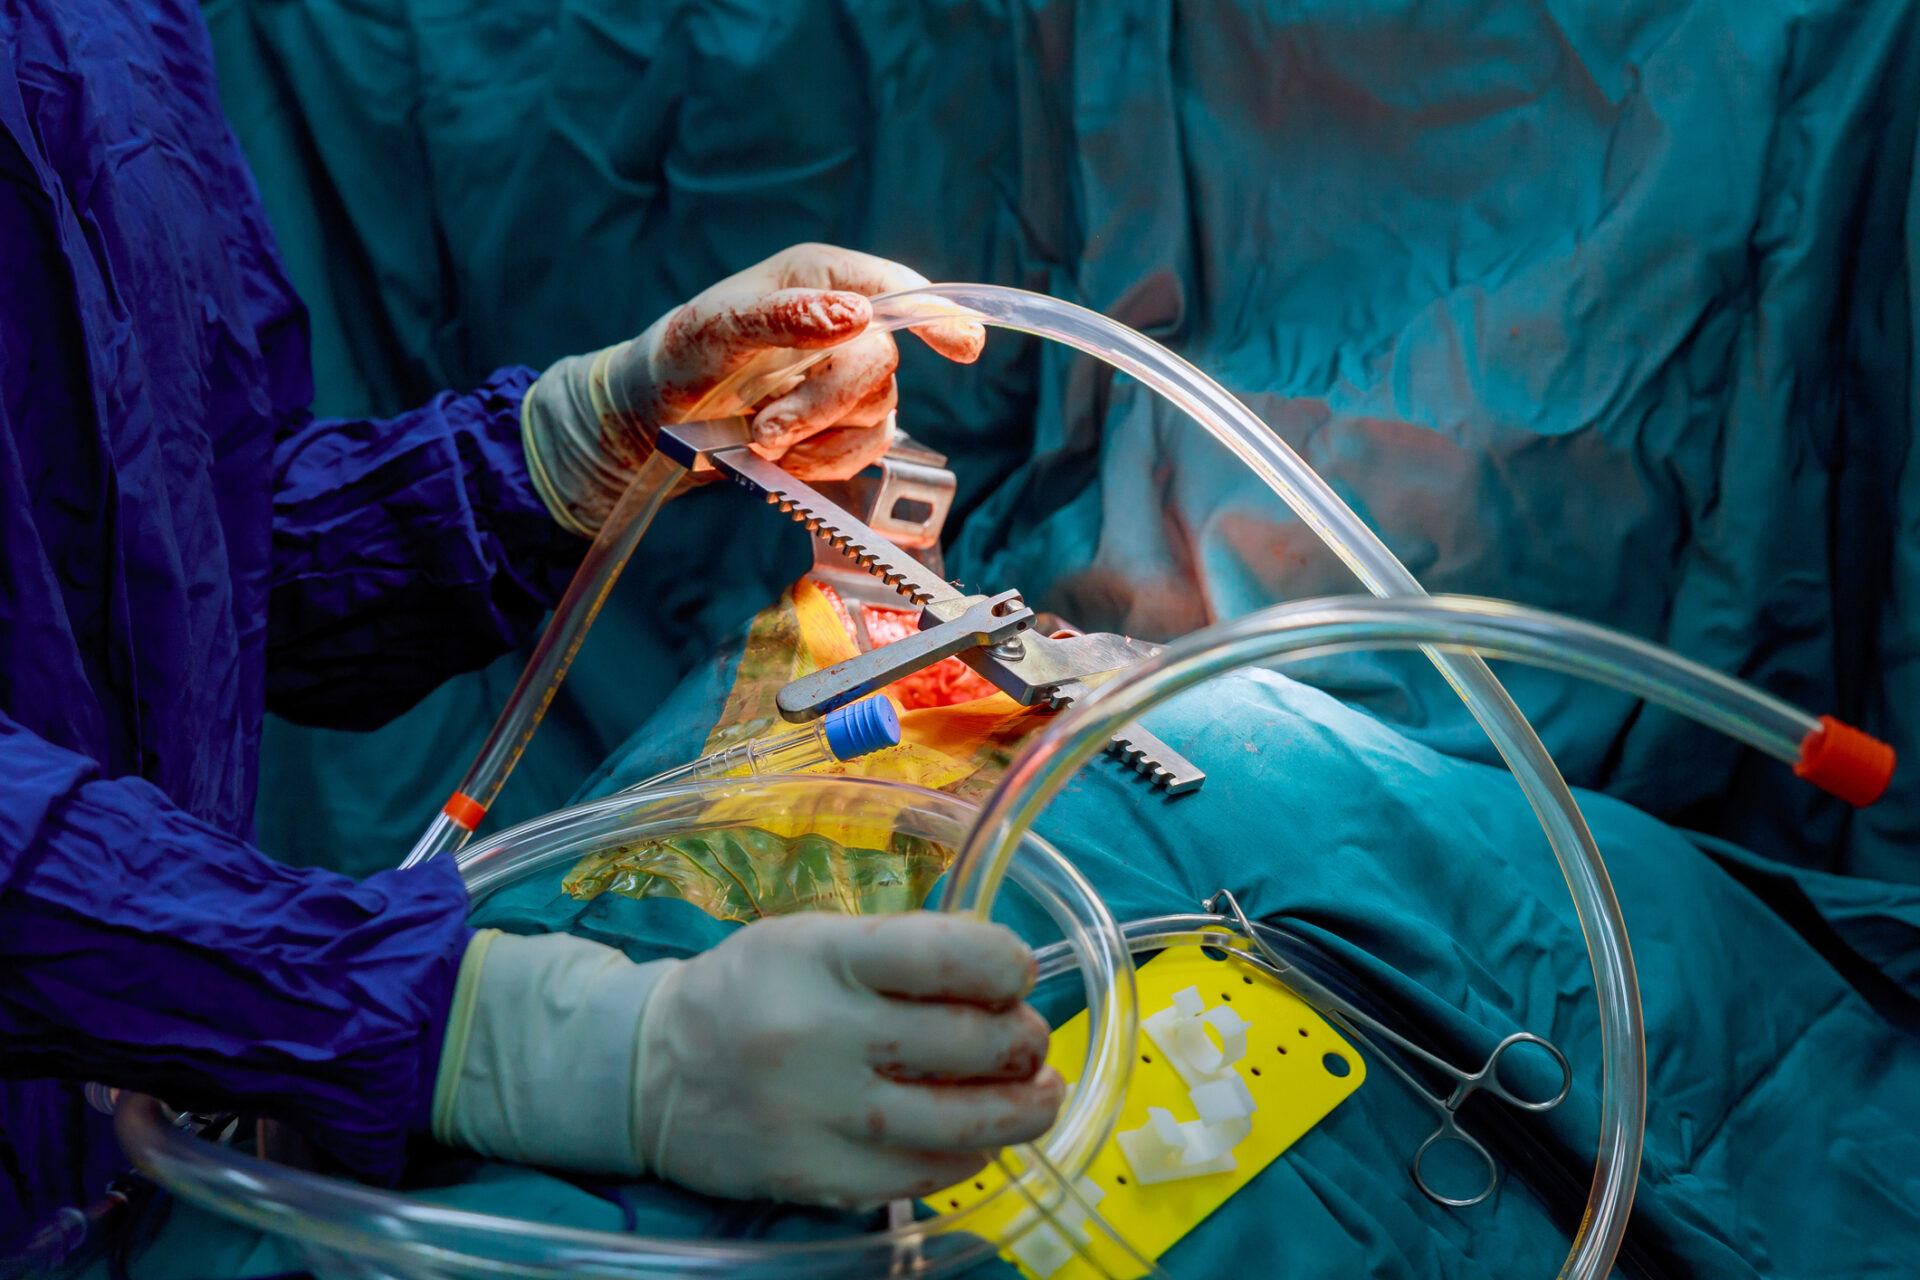 Training in cardiothoracic surgery is long, but residency programs are offering new pathways to help overcome the shortage.